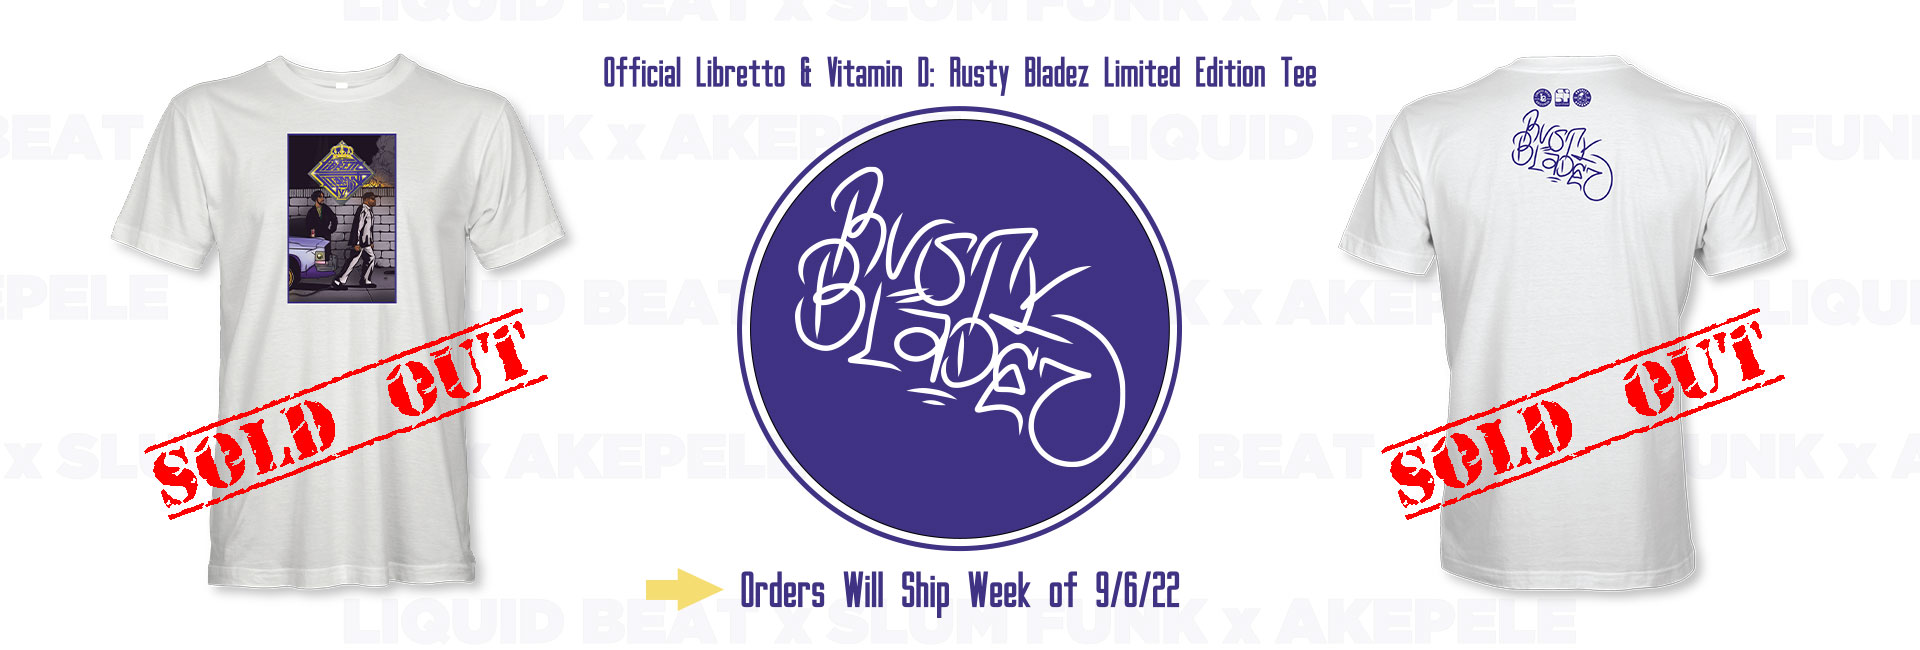 Rusty Blades_Sold Out